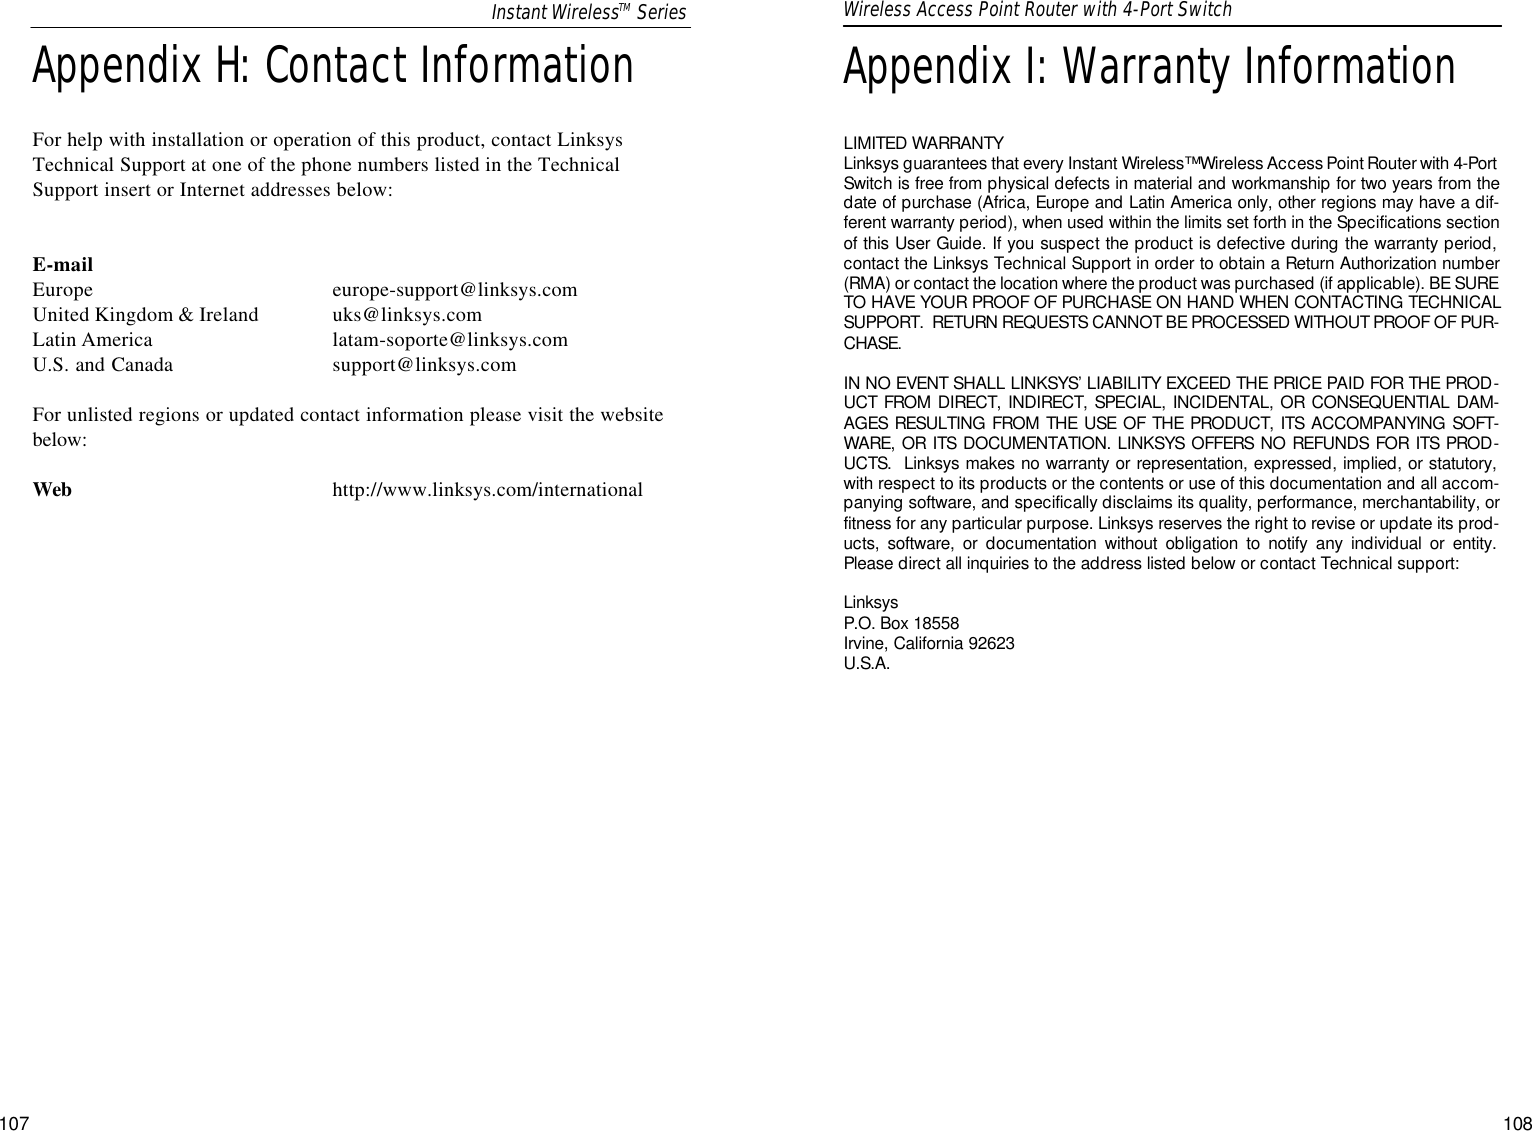 Appendix I: Warranty InformationLIMITED WARRANTY Linksys guarantees that every Instant Wireless™ Wireless Access Point Router with 4-PortSwitch is free from physical defects in material and workmanship for two years from thedate of purchase (Africa, Europe and Latin America only, other regions may have a dif-ferent warranty period), when used within the limits set forth in the Specifications sectionof this User Guide. If you suspect the product is defective during the warranty period,contact the Linksys Technical Support in order to obtain a Return Authorization number(RMA) or contact the location where the product was purchased (if applicable). BE SURETO HAVE YOUR PROOF OF PURCHASE ON HAND WHEN CONTACTING TECHNICALSUPPORT.  RETURN REQUESTS CANNOT BE PROCESSED WITHOUT PROOF OF PUR-CHASE.IN NO EVENT SHALL LINKSYS’ LIABILITY EXCEED THE PRICE PAID FOR THE PROD-UCT FROM DIRECT, INDIRECT, SPECIAL, INCIDENTAL, OR CONSEQUENTIAL DAM-AGES RESULTING FROM THE USE OF THE PRODUCT, ITS ACCOMPANYING SOFT-WARE, OR ITS DOCUMENTATION. LINKSYS OFFERS NO REFUNDS FOR ITS PROD-UCTS.  Linksys makes no warranty or representation, expressed, implied, or statutory,with respect to its products or the contents or use of this documentation and all accom-panying software, and specifically disclaims its quality, performance, merchantability, orfitness for any particular purpose. Linksys reserves the right to revise or update its prod-ucts, software, or documentation without obligation to notify any individual or entity.Please direct all inquiries to the address listed below or contact Technical support:Linksys  P.O. Box 18558Irvine, California 92623 U.S.A.107Wireless Access Point Router with 4-Port Switch108Appendix H: Contact InformationFor help with installation or operation of this product, contact LinksysTechnical Support at one of the phone numbers listed in the TechnicalSupport insert or Internet addresses below:E-mailEurope europe-support@linksys.comUnited Kingdom &amp; Ireland uks@linksys.comLatin America latam-soporte@linksys.comU.S. and Canada support@linksys.comFor unlisted regions or updated contact information please visit the websitebelow:Web http://www.linksys.com/internationalInstant WirelessTM Series